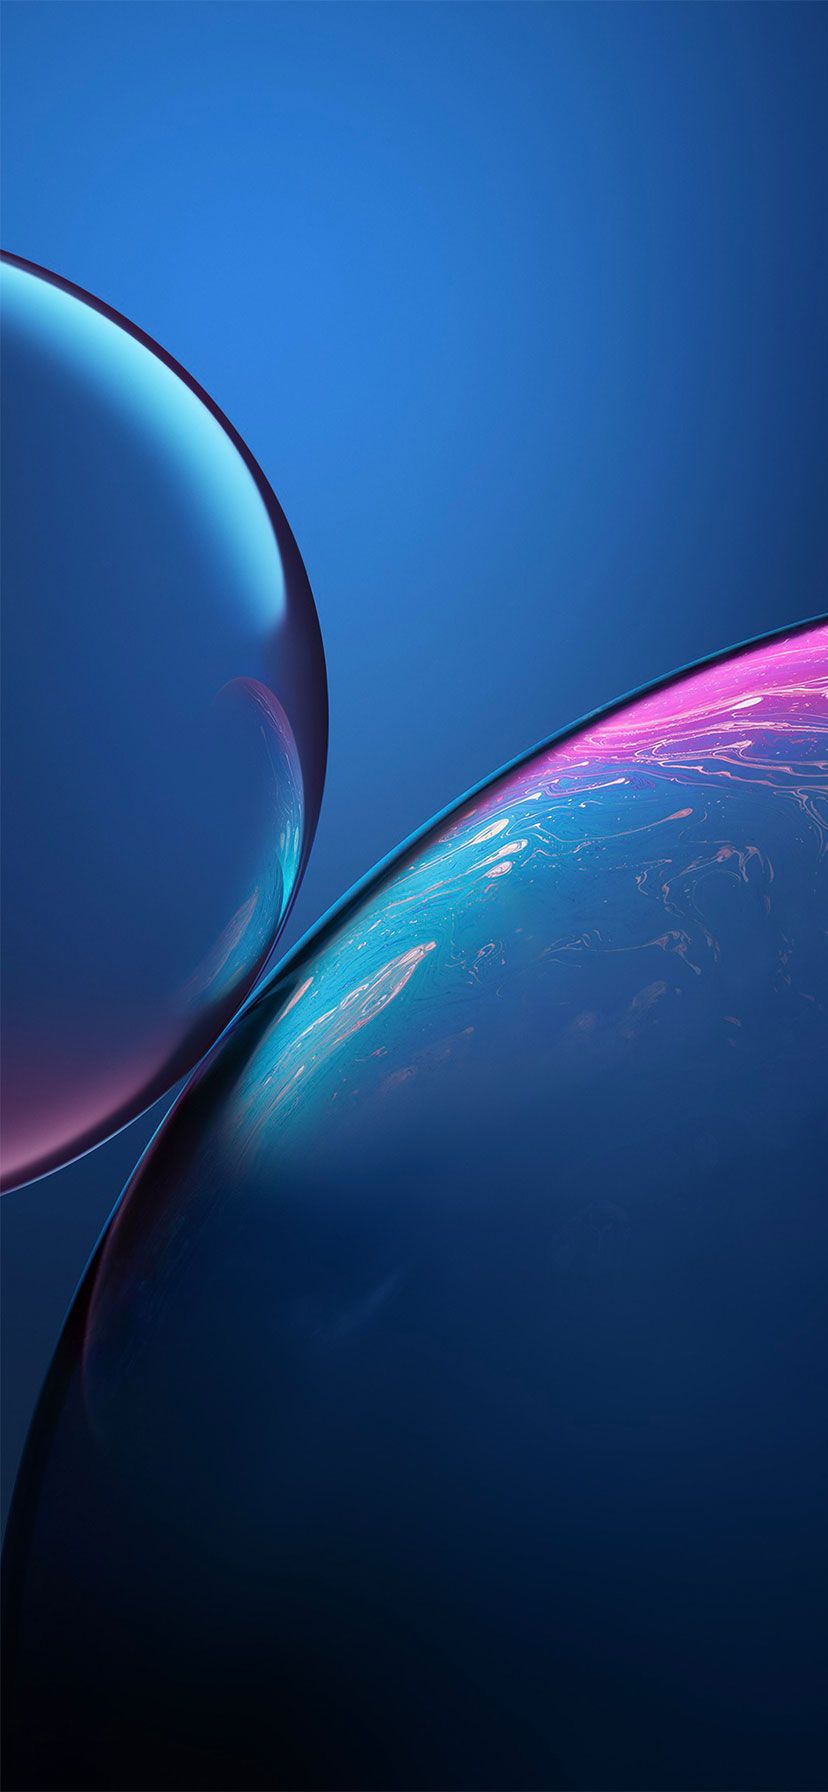 Free download 50 Best High Quality iPhone XR Wallpaper